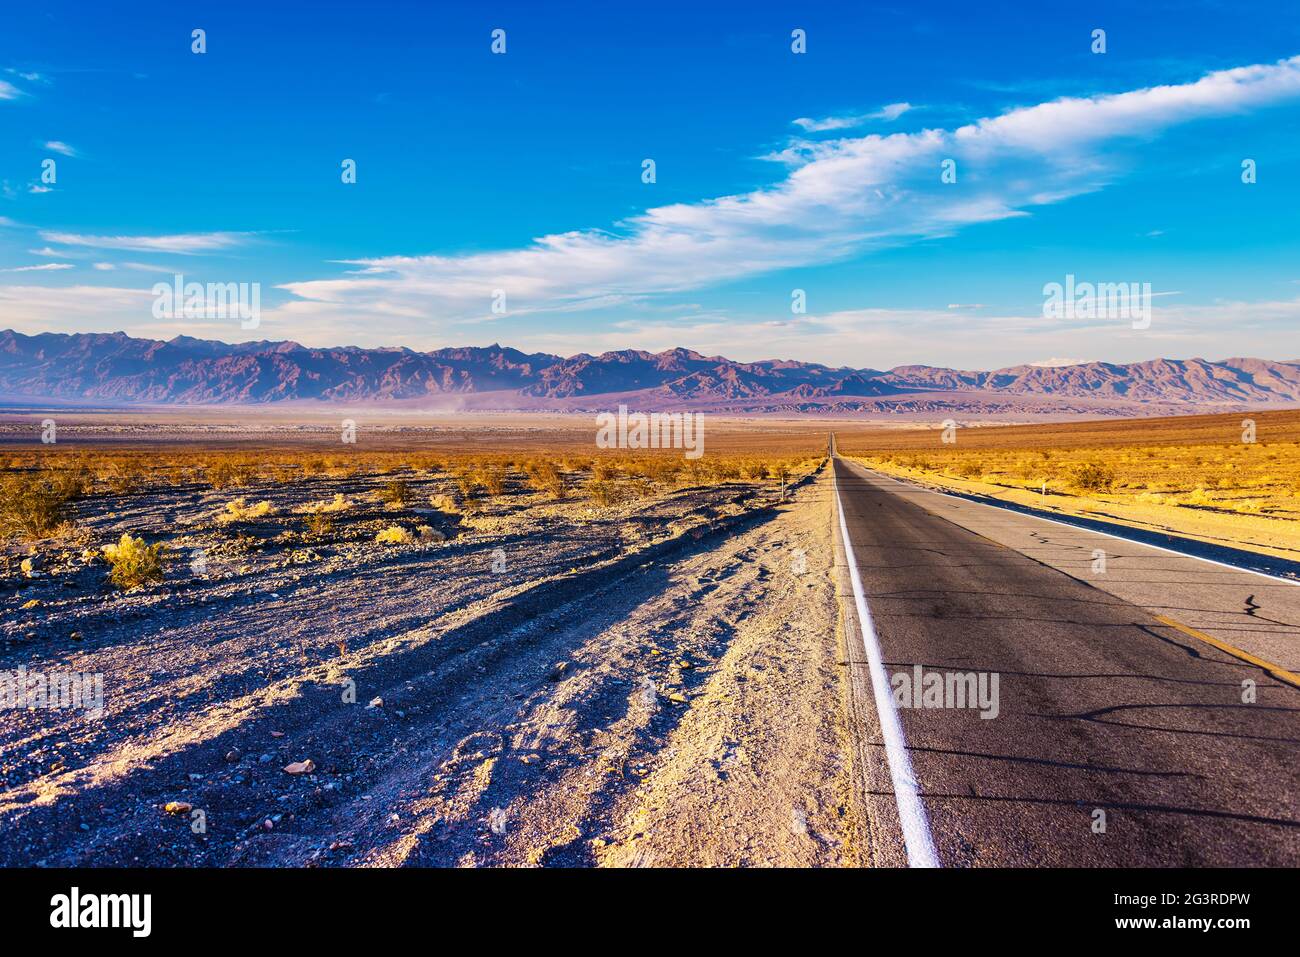 Death Valley Mojave Street, highway, wide angle Stock Photo